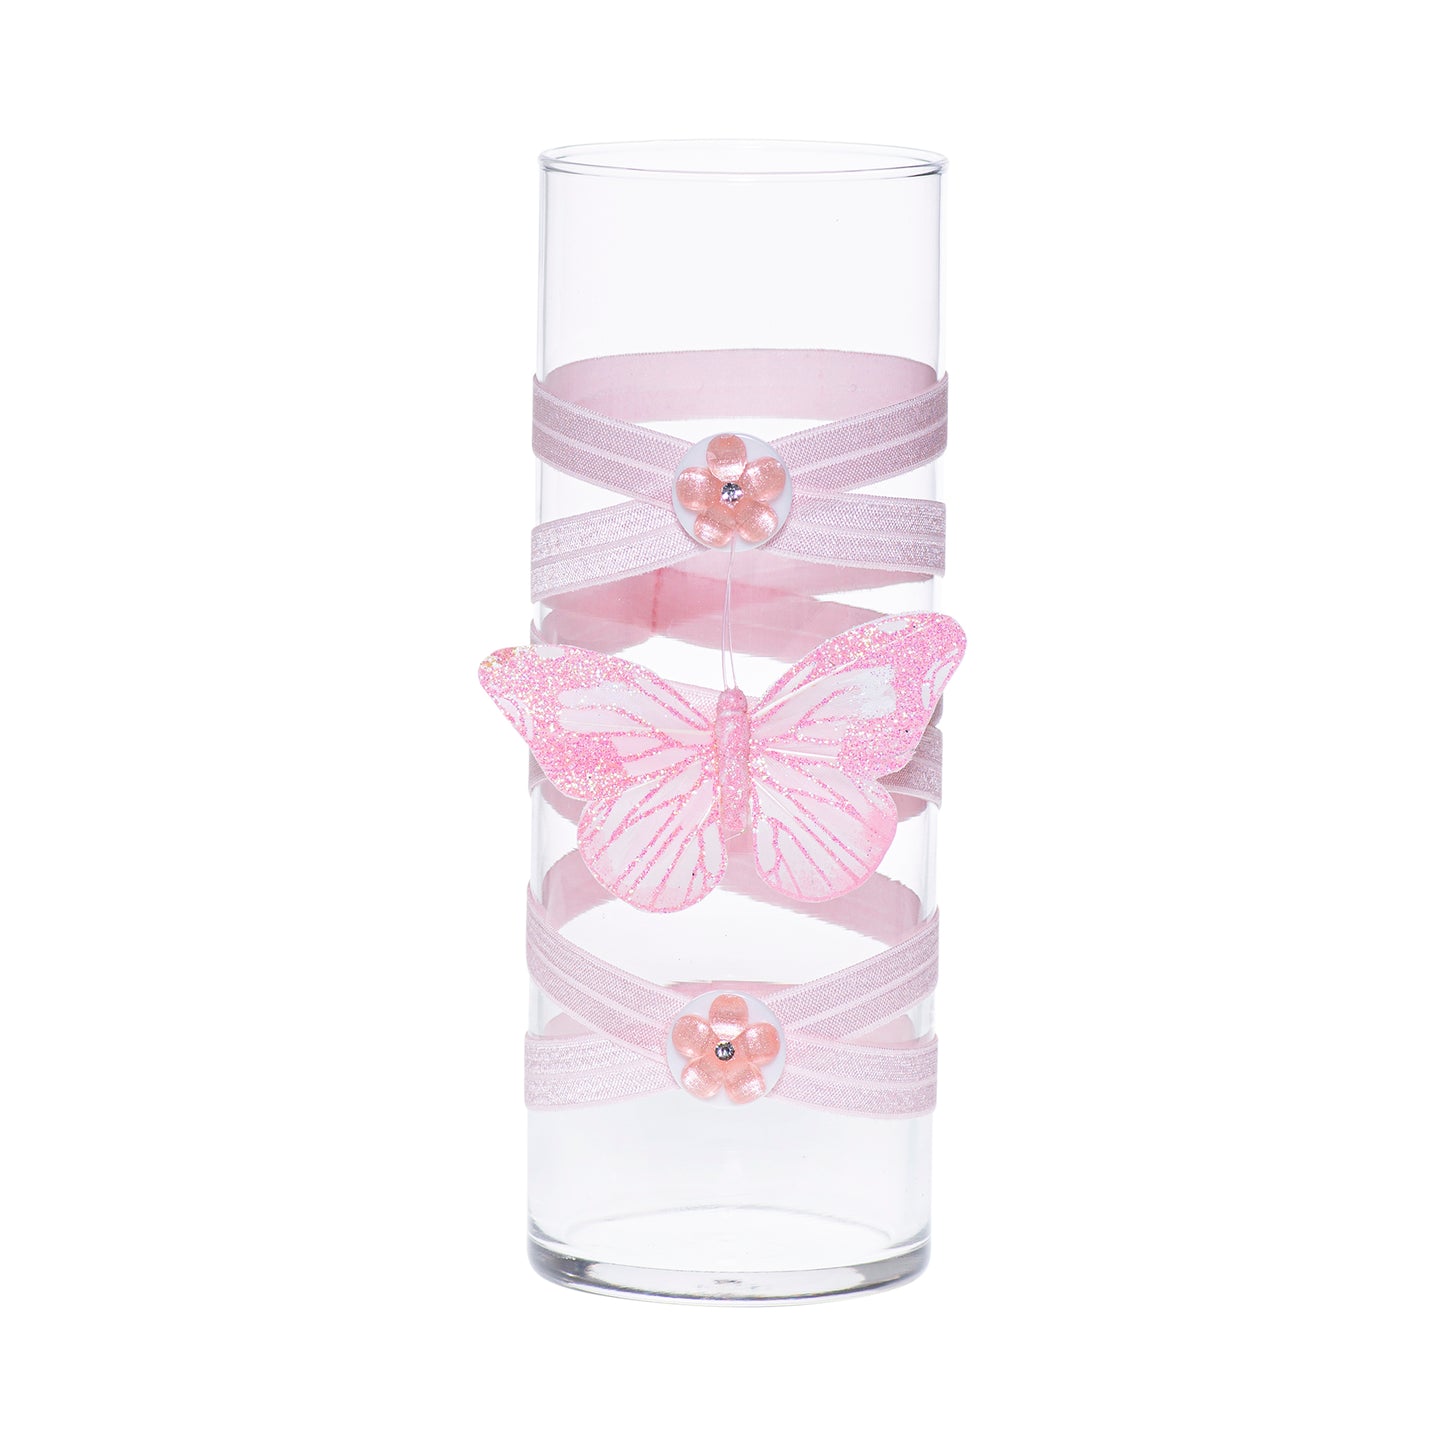 3.5" x 9.5" Vase Light Pink 5X 6 White Peach Gem Flowers Butterfly Valentine Love Complete Collection